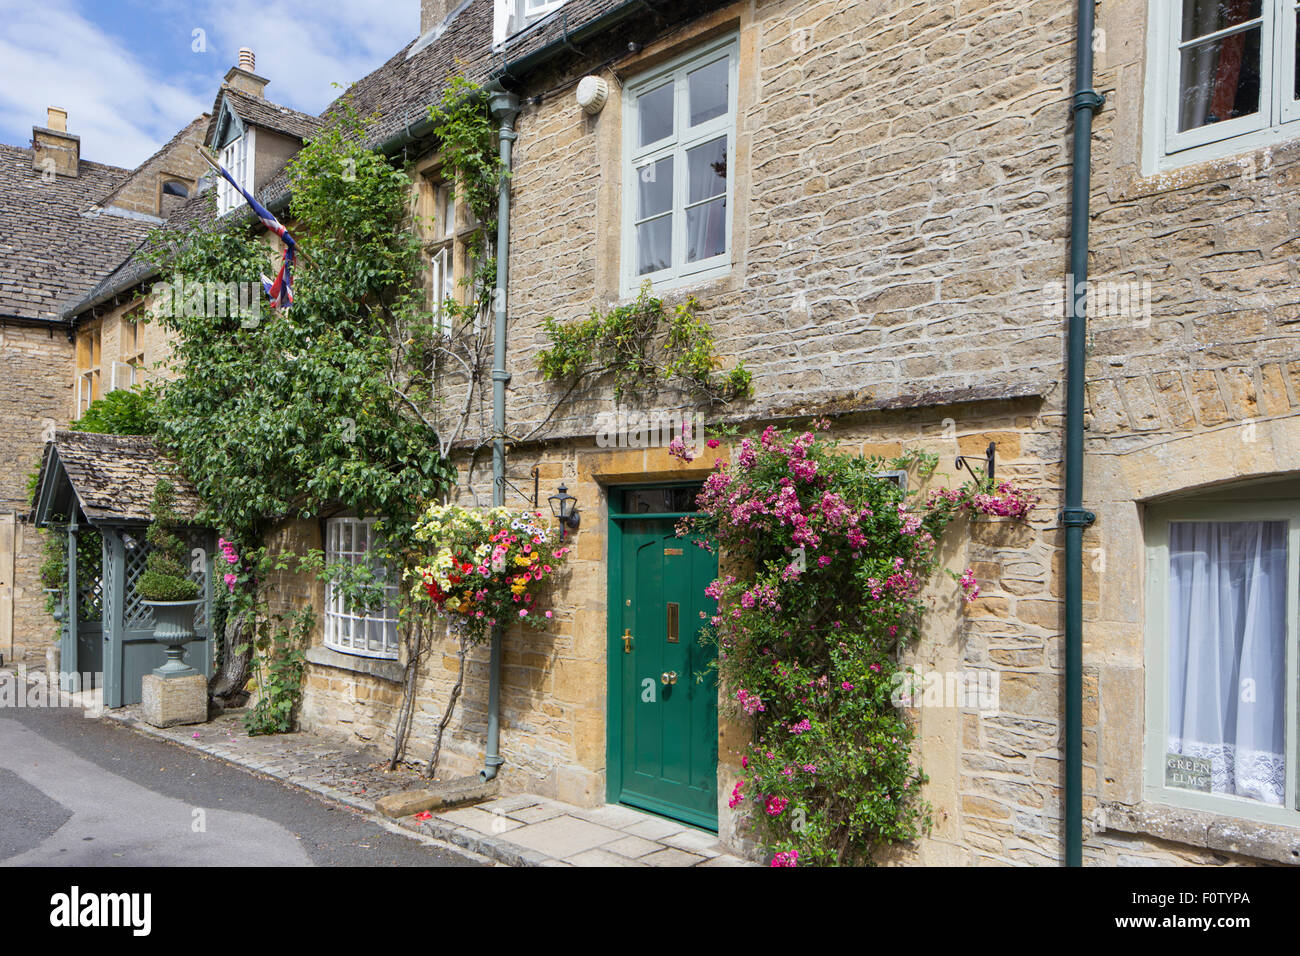 Attractive cottages in the Cotswold town of Stow on the Wold, Gloucestershire, England, UK Stock Photo